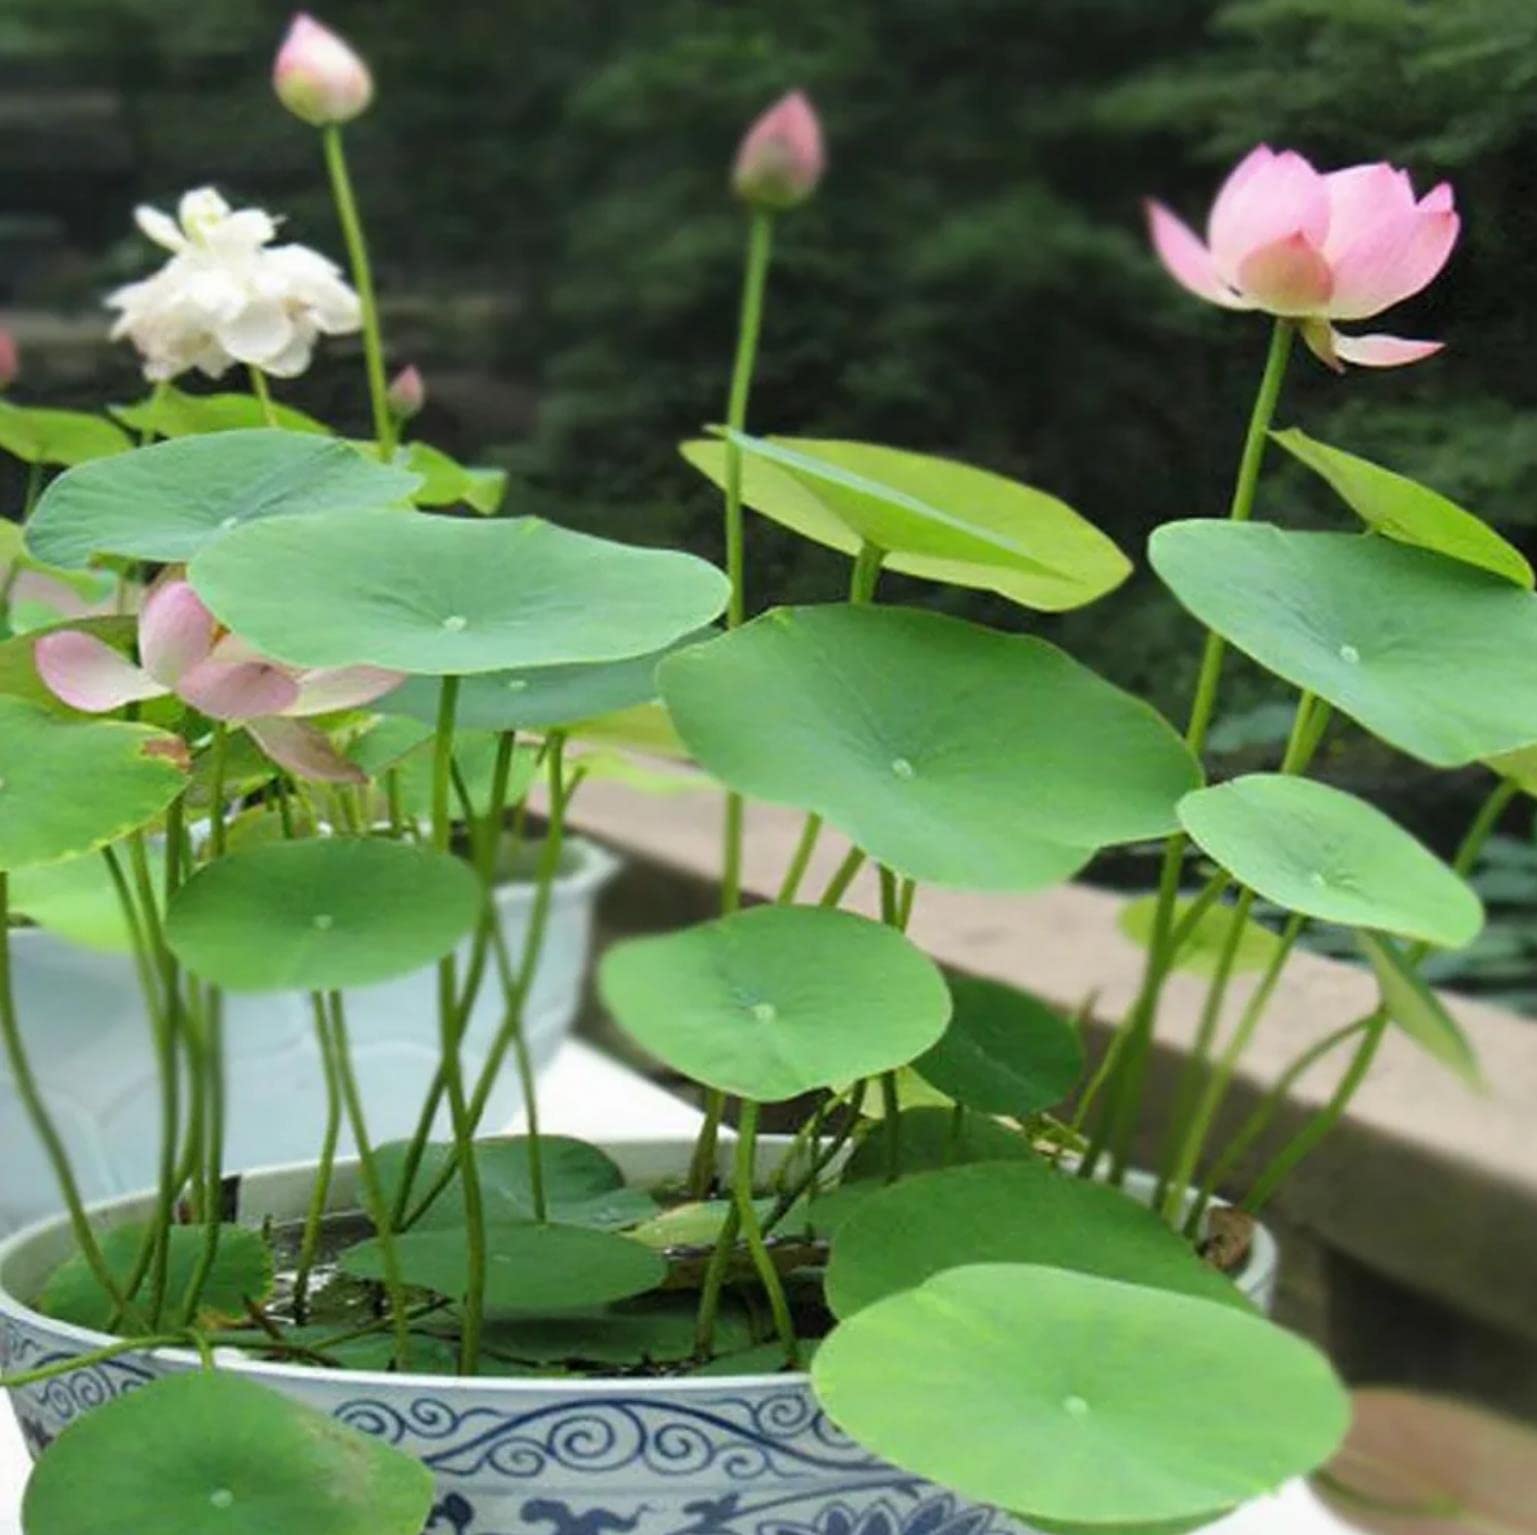 (30 Seeds) Bonsai Lotus Seeds for Planting, Water Lily Flower, Home Garden Plant Seeds, Flowering Aquatic Bonsai Plant